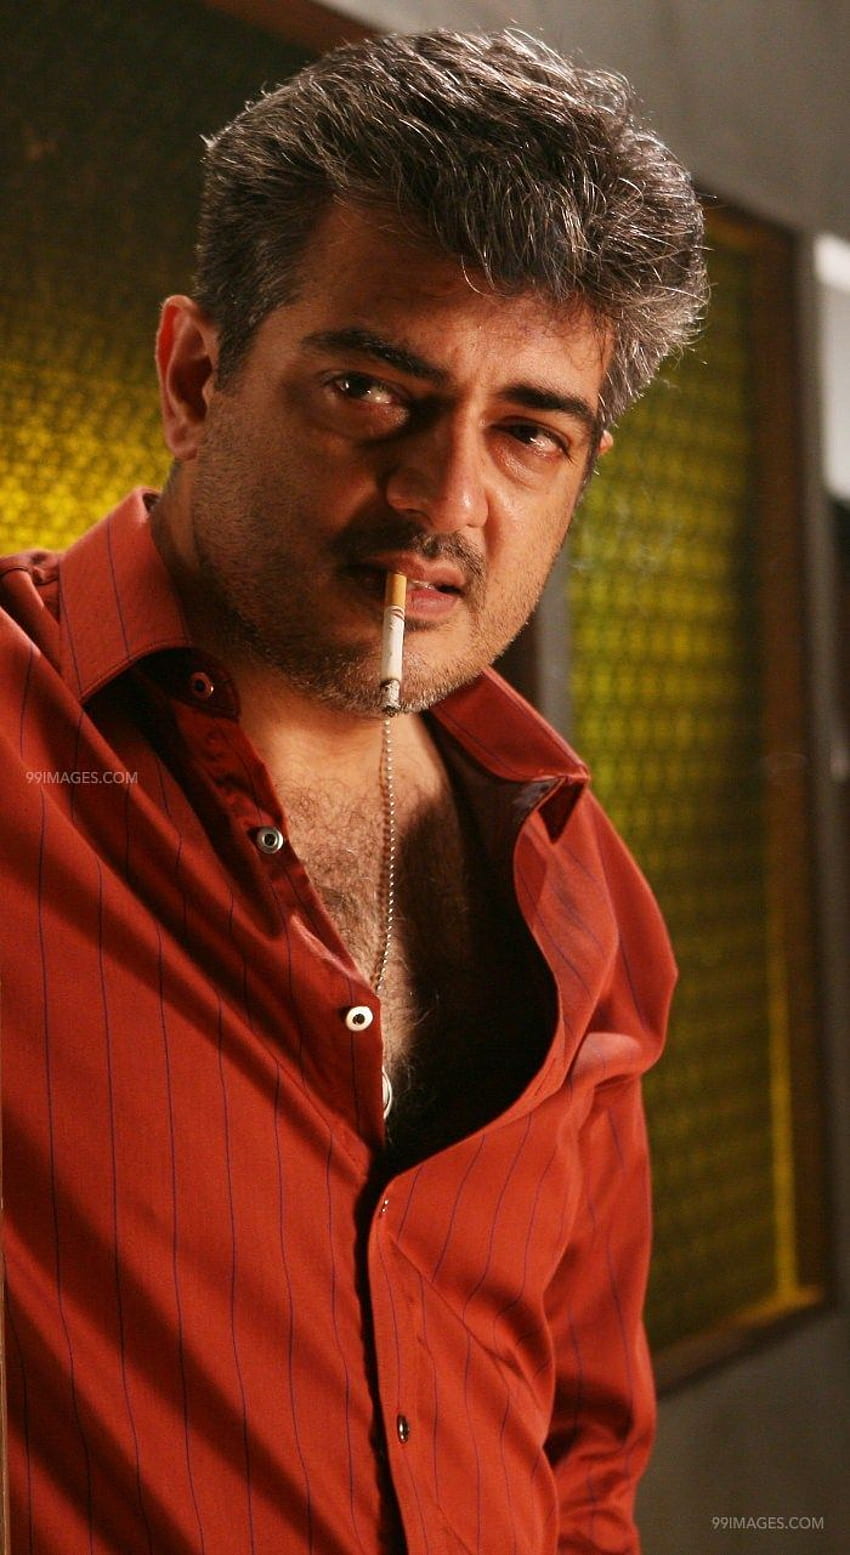 Collection of over 999+ Amazing Thala Ajith HD Images in Full 4K Resolution